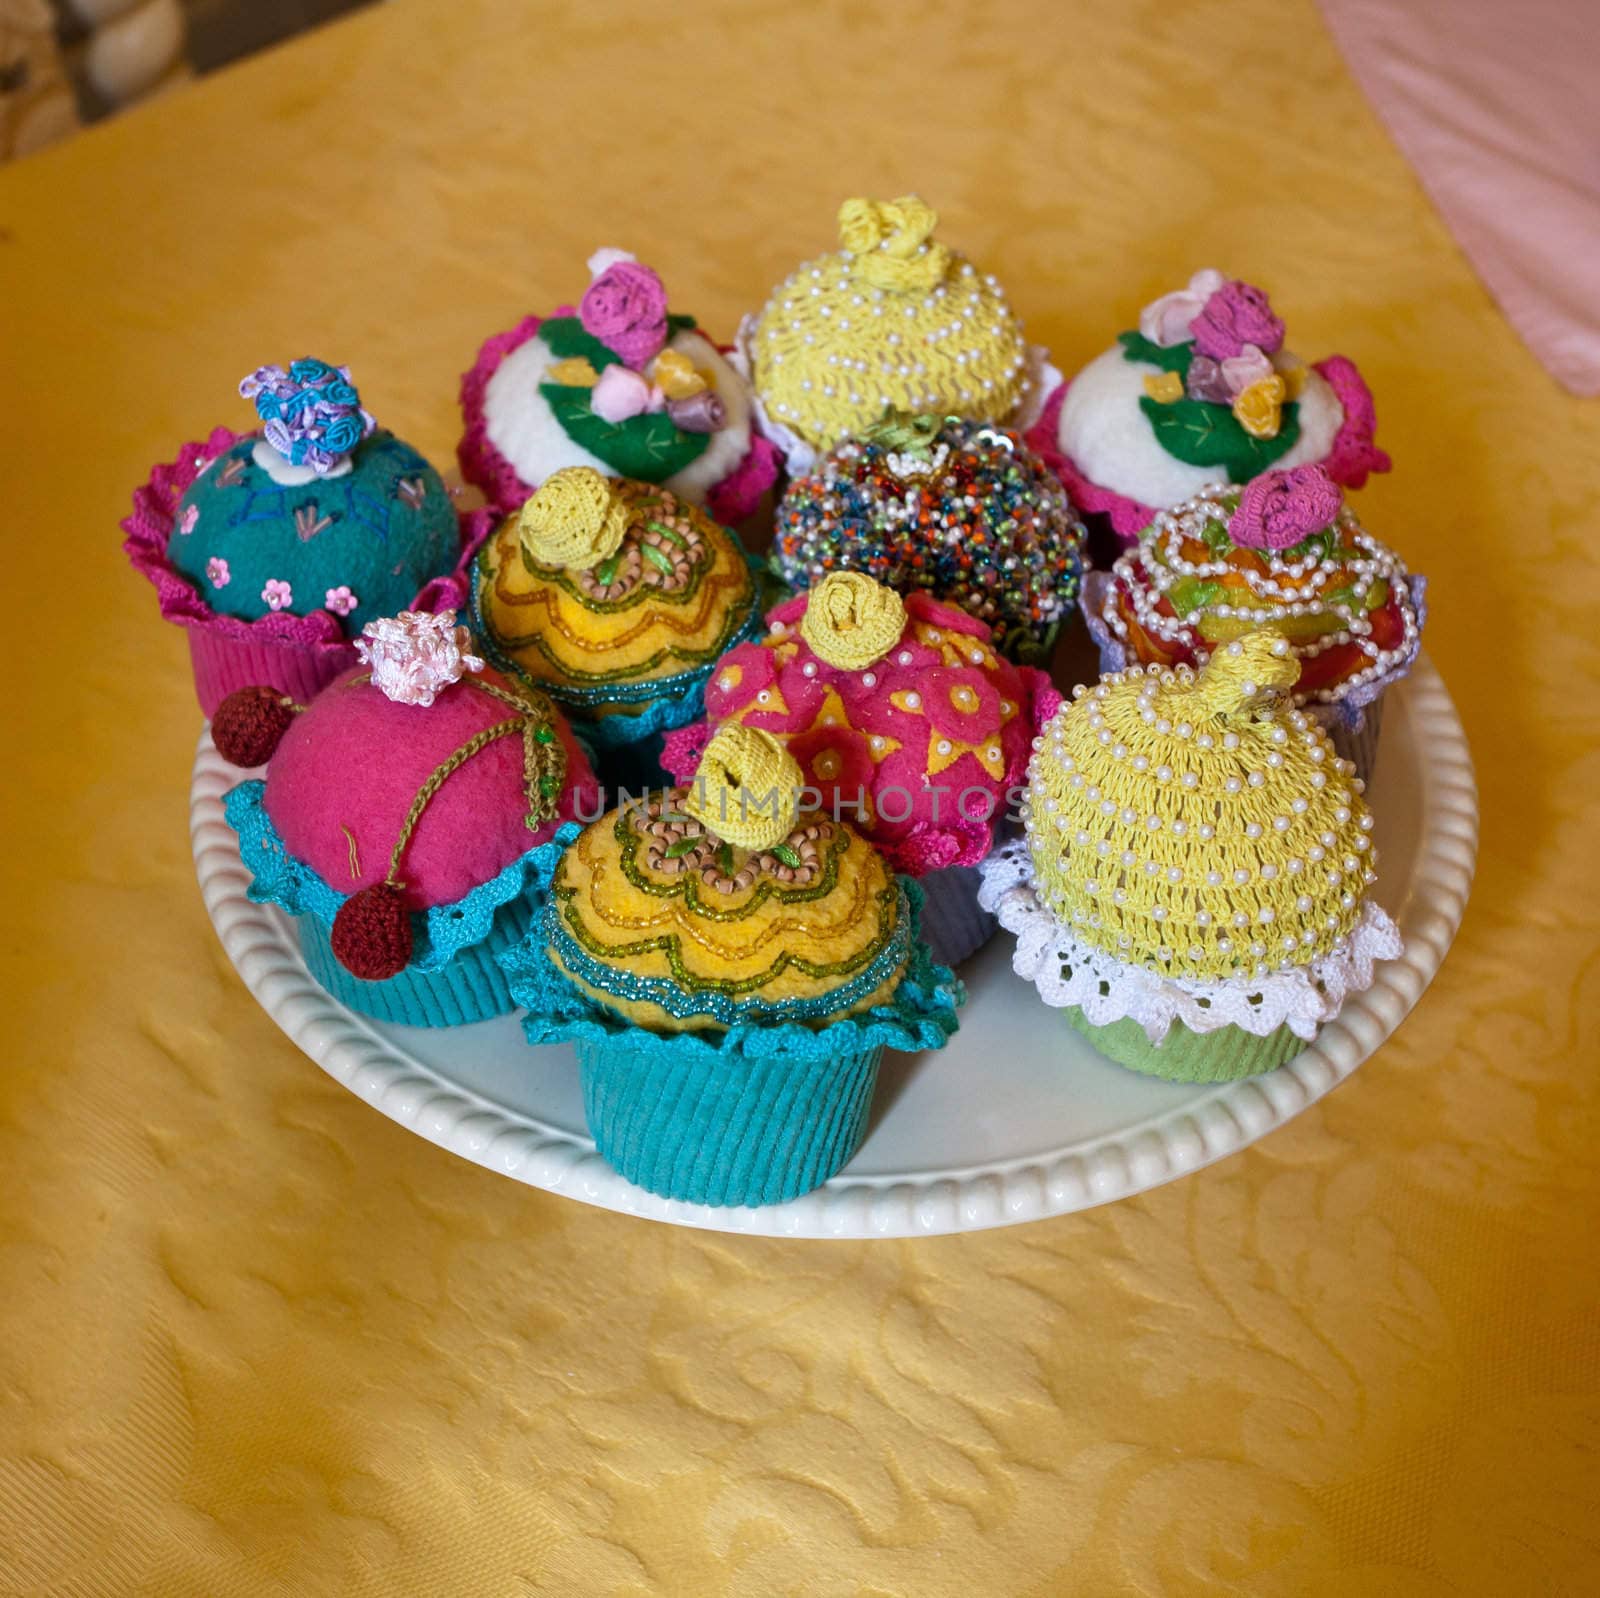 Unusual knitted or crocheted cakes and buns on a white plate